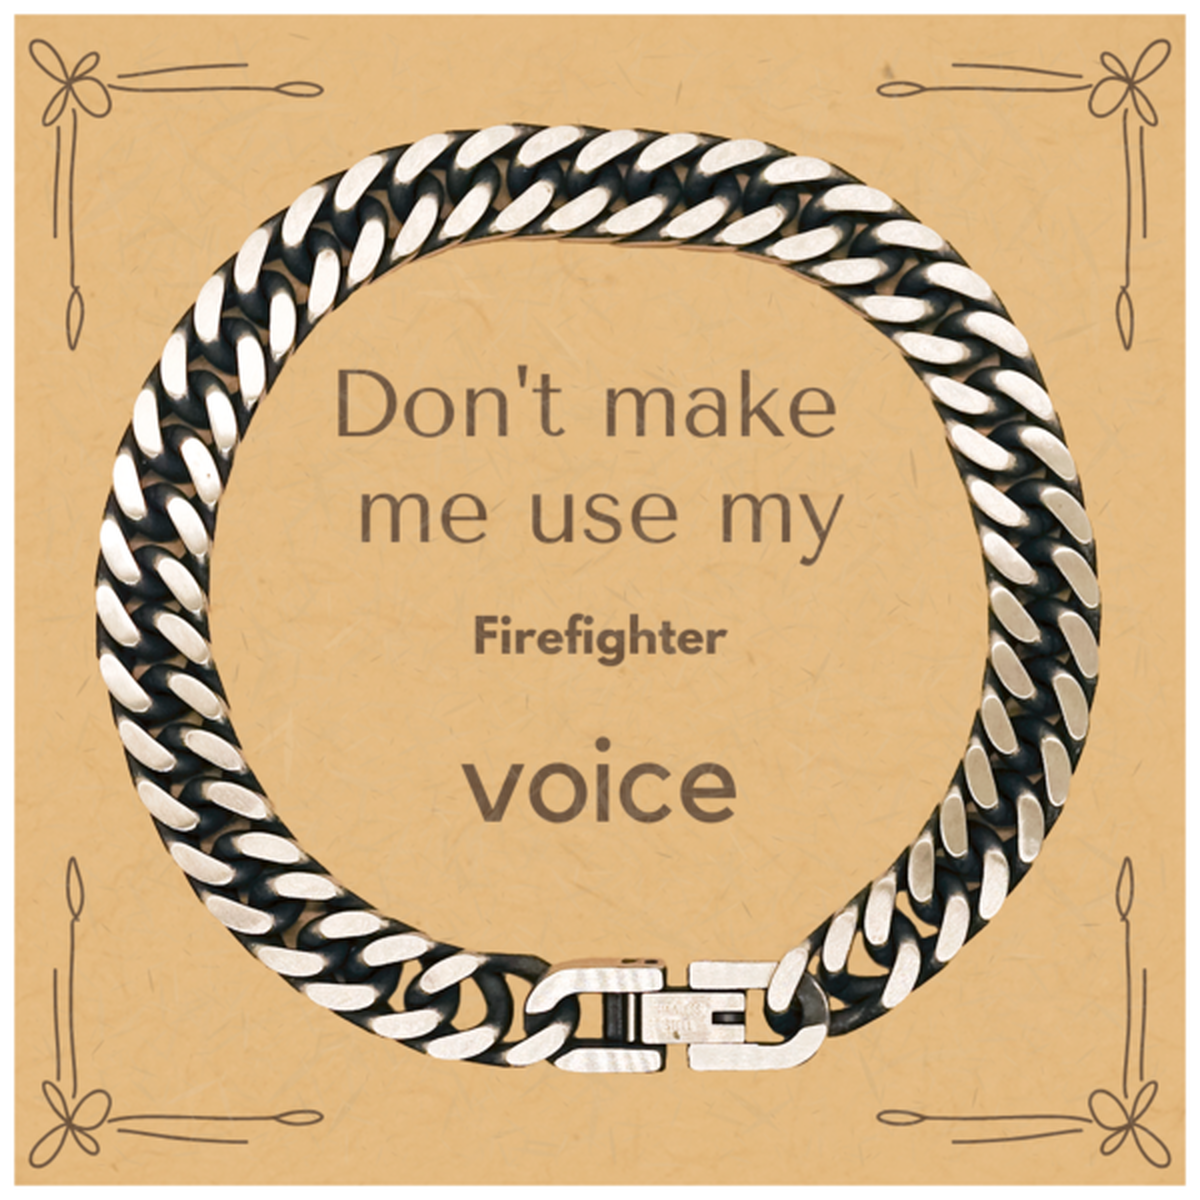 Don't make me use my Firefighter voice, Sarcasm Firefighter Card Gifts, Christmas Firefighter Cuban Link Chain Bracelet Birthday Unique Gifts For Firefighter Coworkers, Men, Women, Colleague, Friends